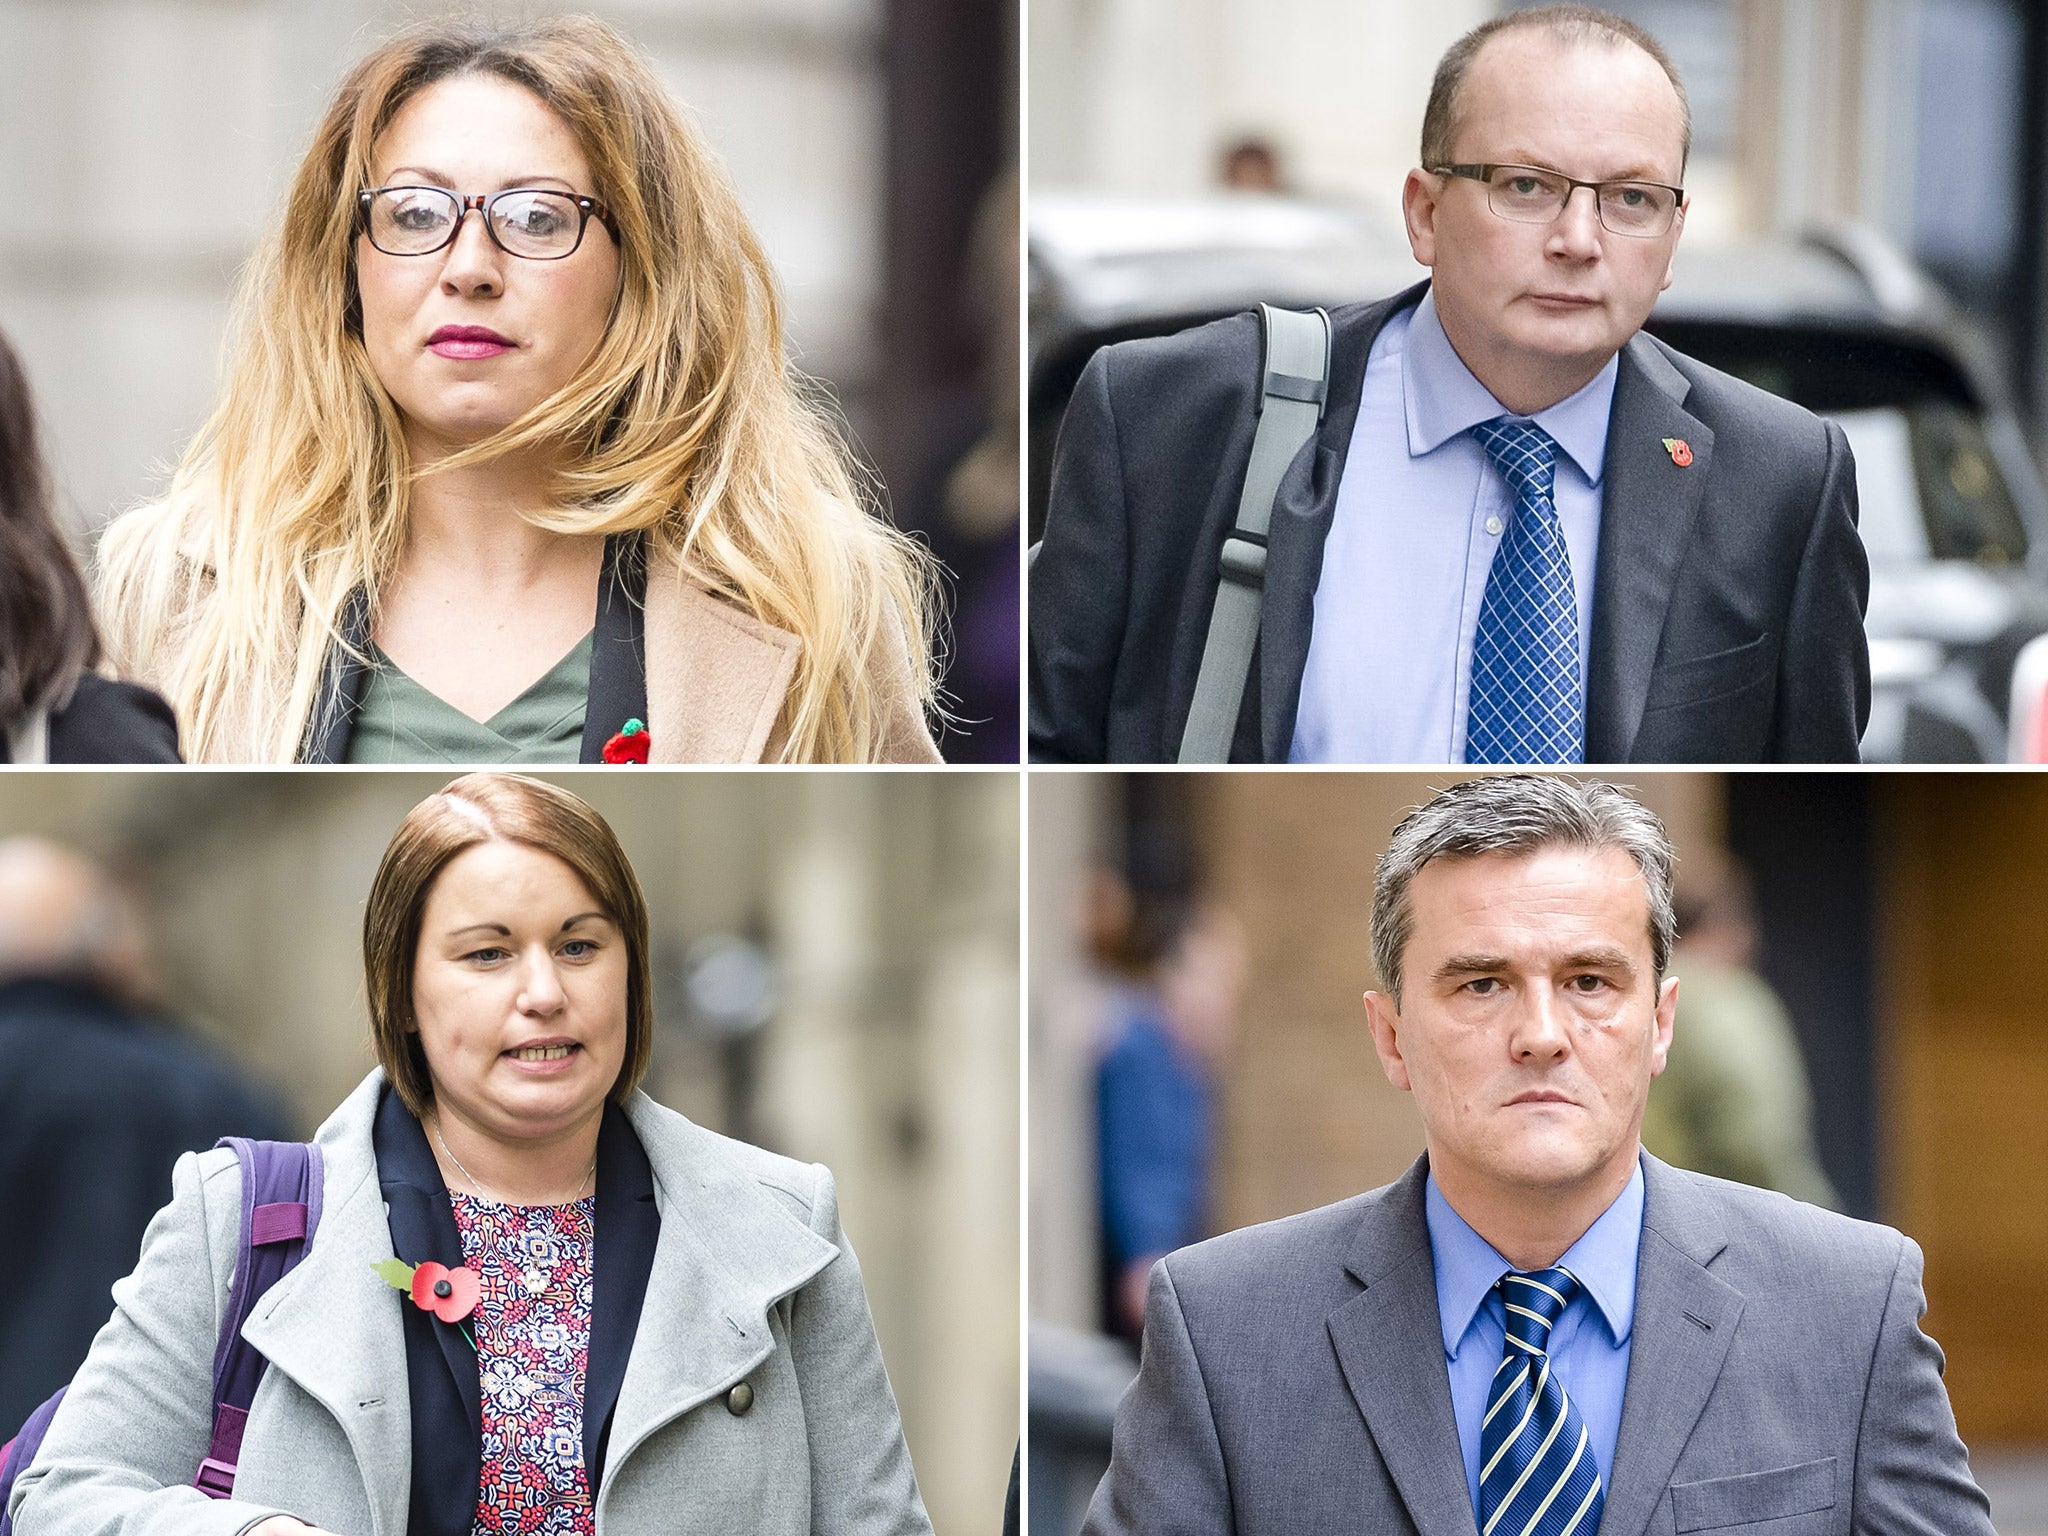 (Clockwise from top left) PC Leanne Winter, PC Kevin Duffy, PCSO Andrew Passmore and PC Helen Harris are on trial accused of ignoring Bijan Ebrahimi after threats to his life